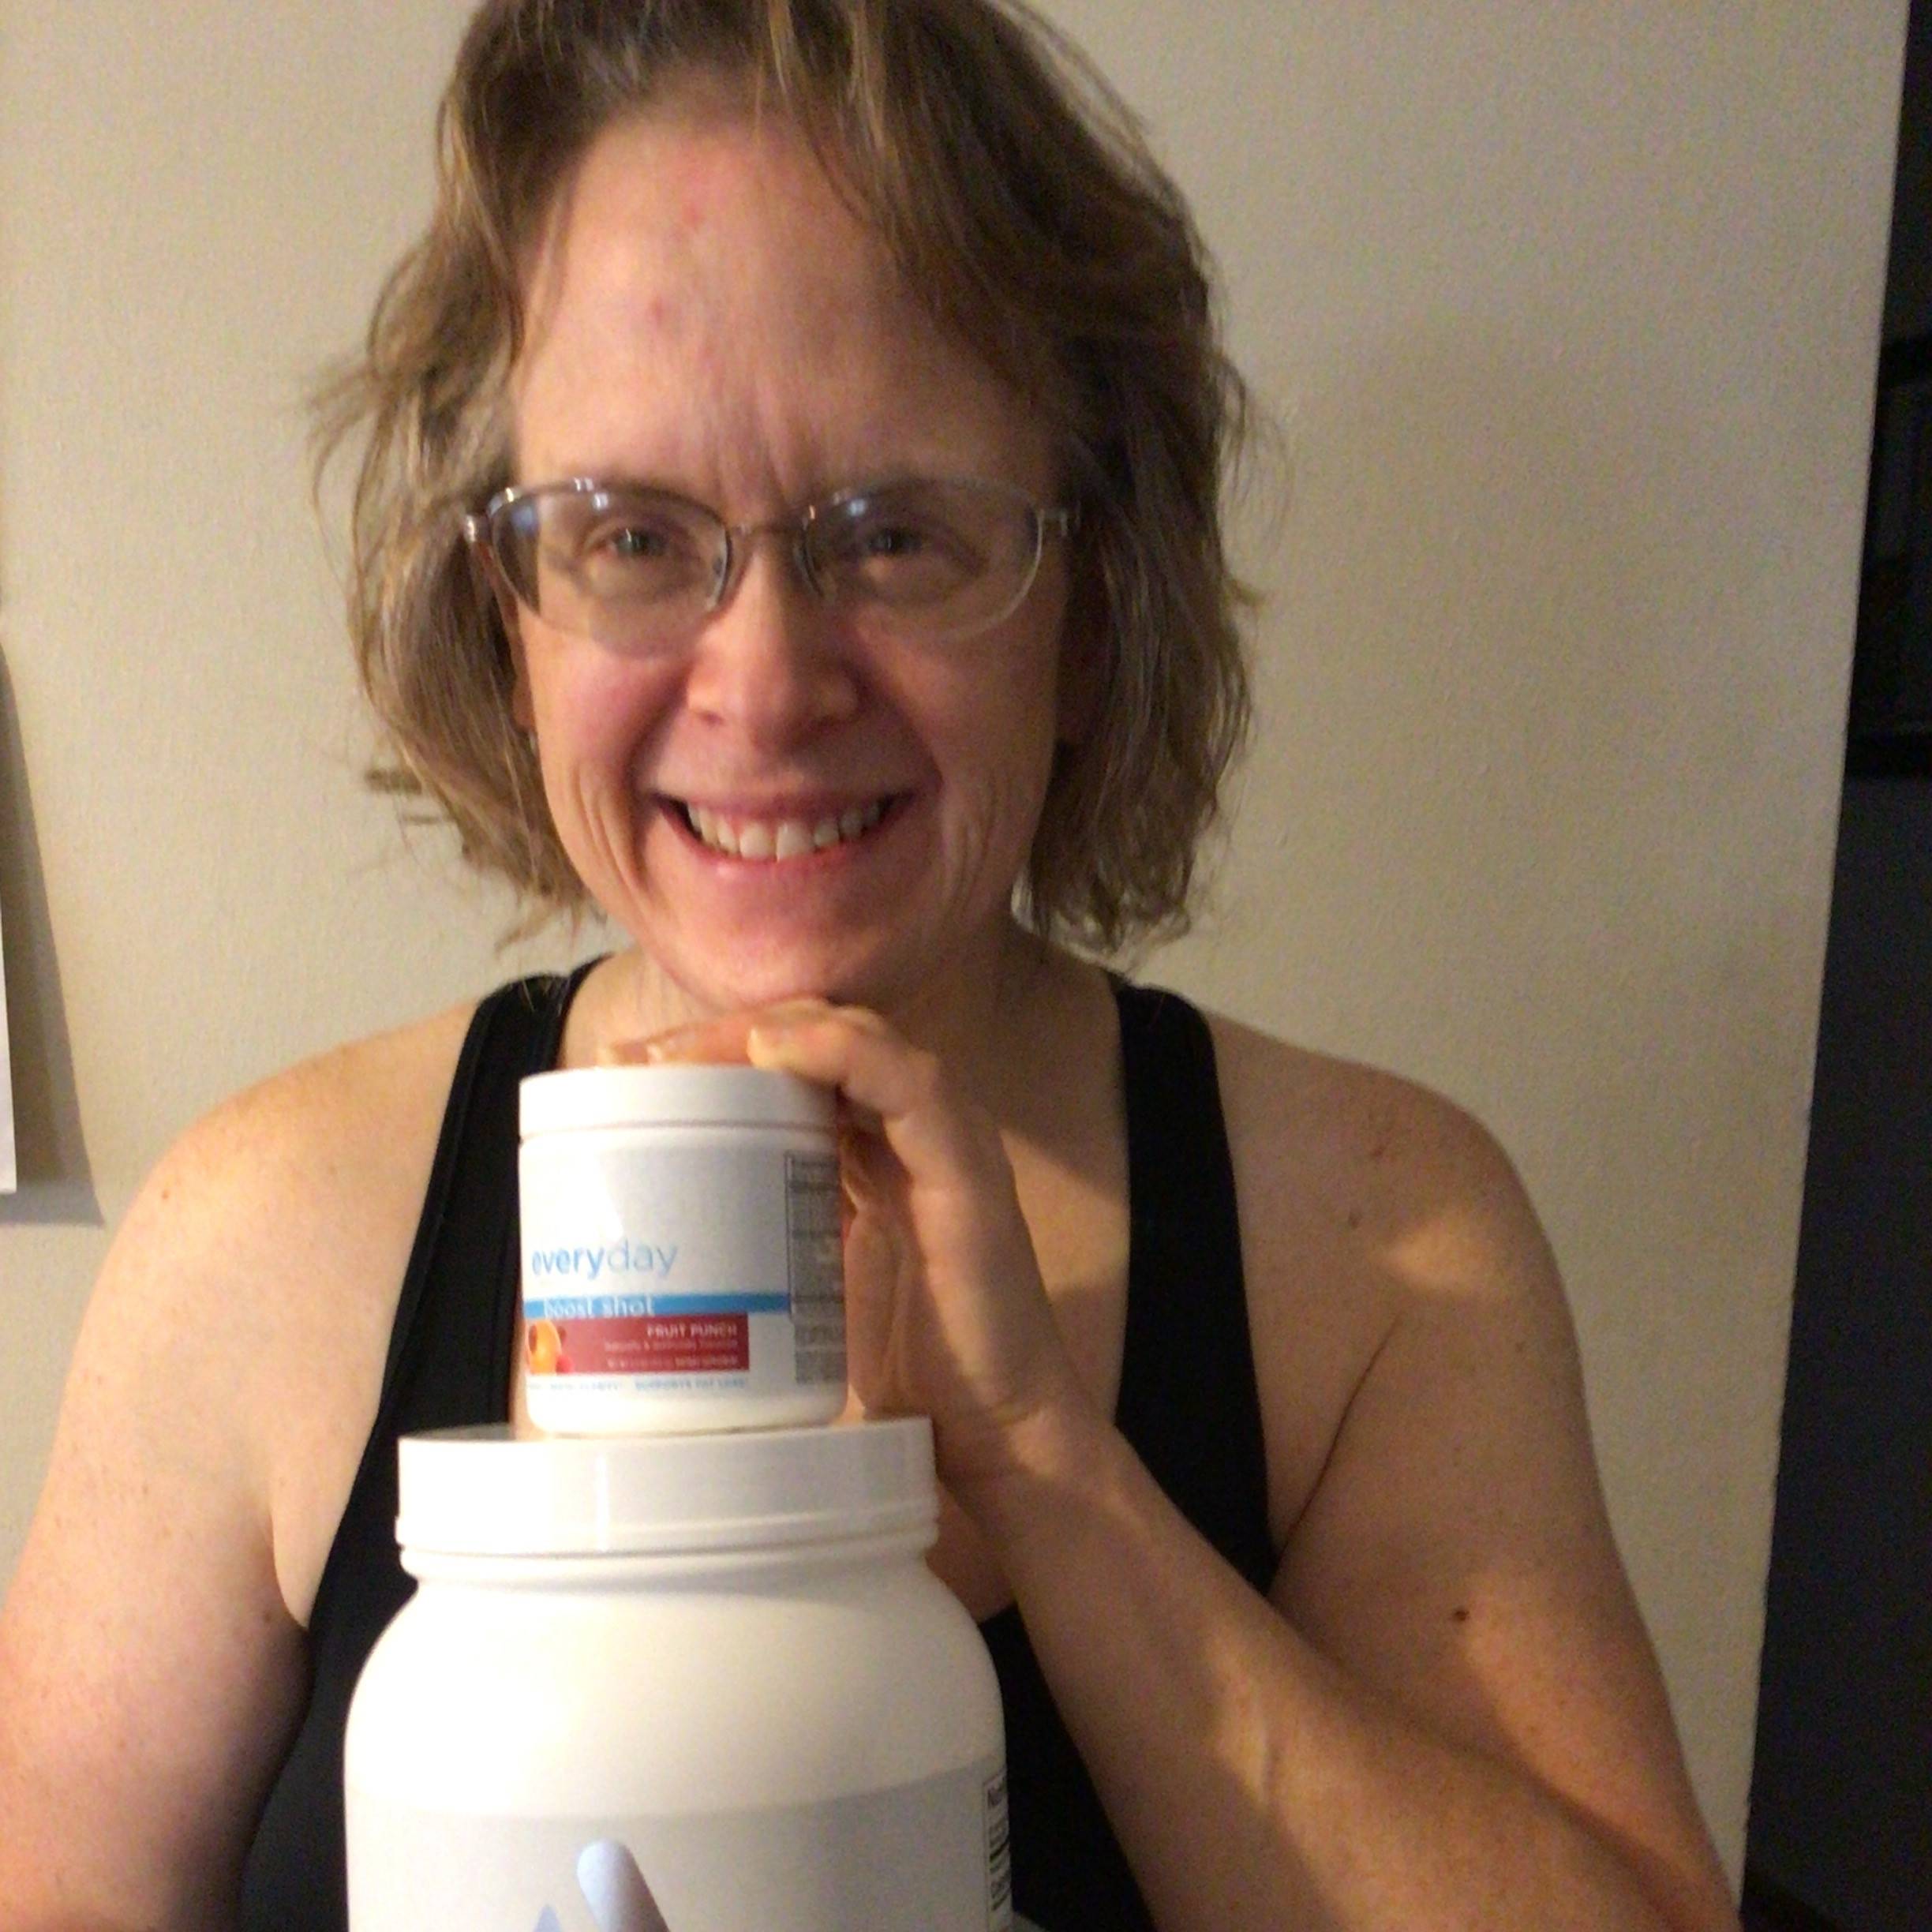 Marna L. Loves Clean Energy She Gets from Boost Shot*